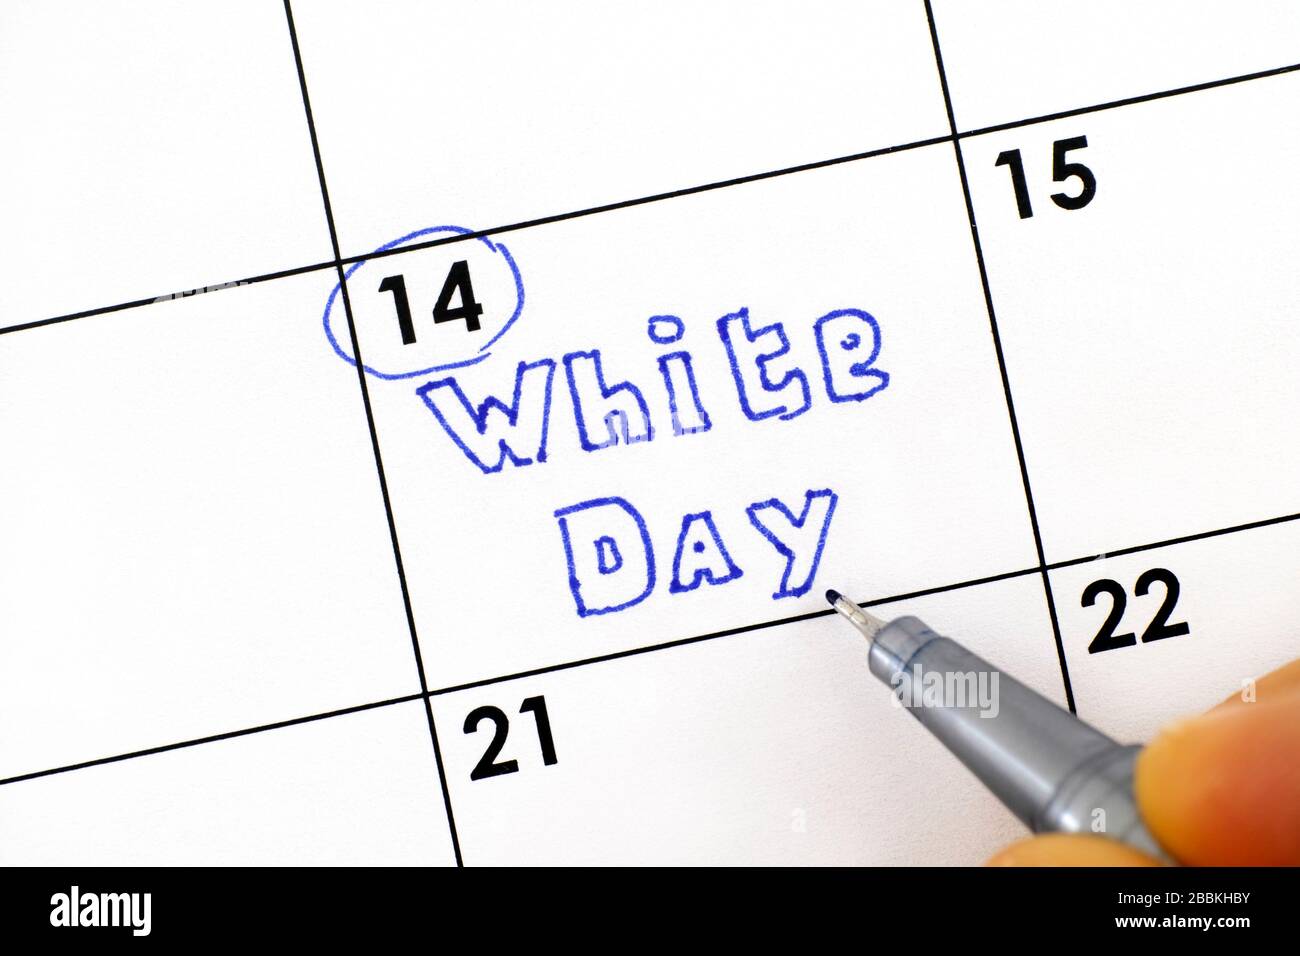 Woman fingers with pen writing reminder White Day in calendar.  March 14. Stock Photo